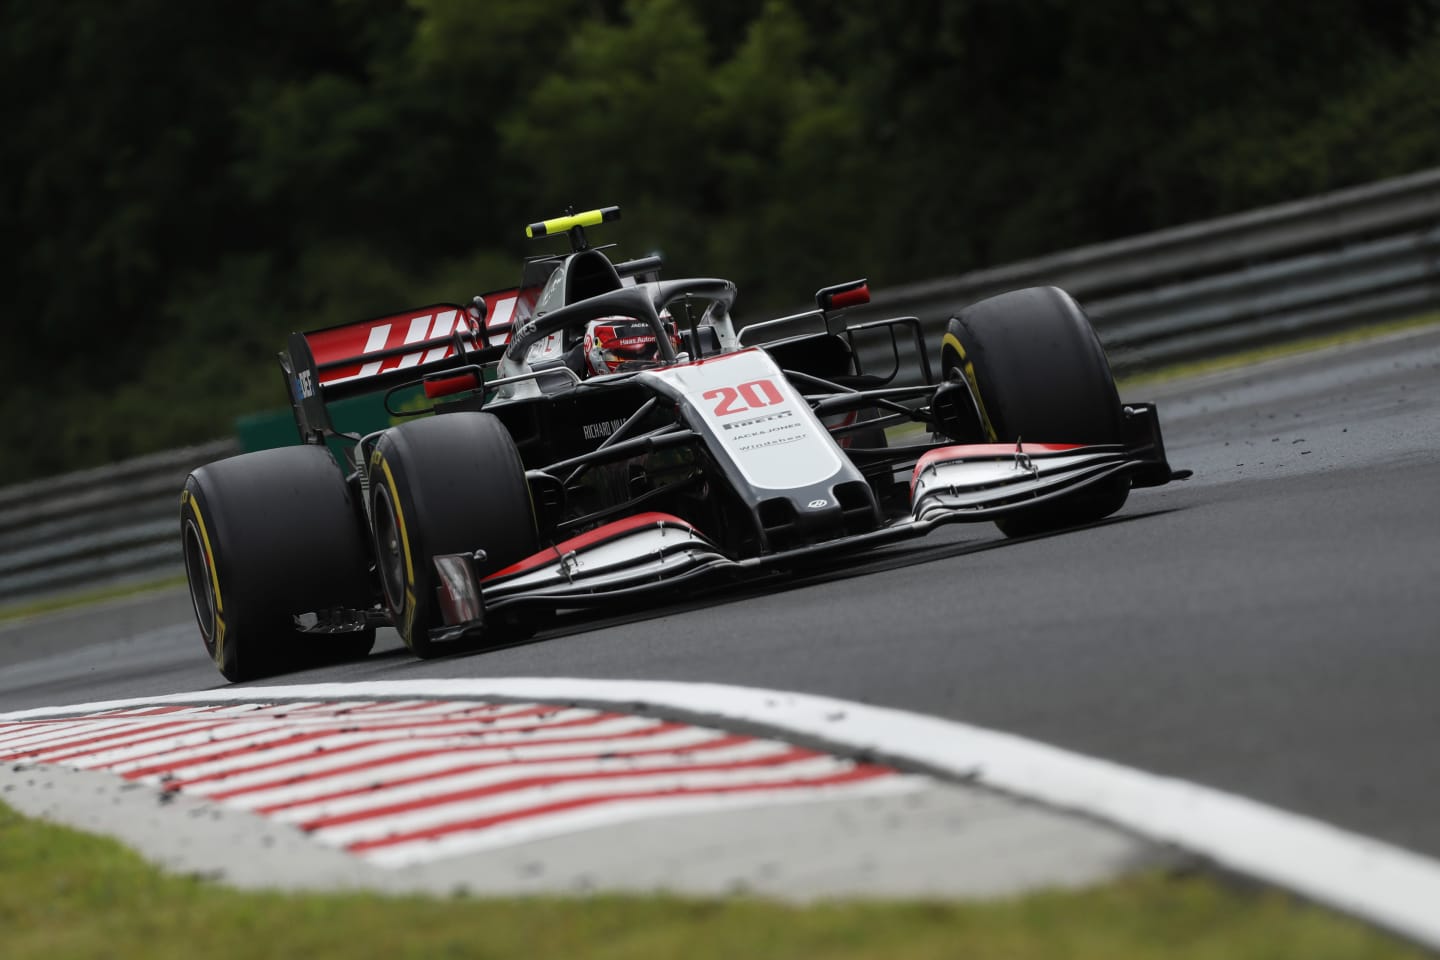 BUDAPEST, HUNGARY - JULY 19: Kevin Magnussen of Denmark driving the (20) Haas F1 Team VF-20 Ferrari on track during the Formula One Grand Prix of Hungary at Hungaroring on July 19, 2020 in Budapest, Hungary. (Photo by Darko Bandic/Pool via Getty Images)